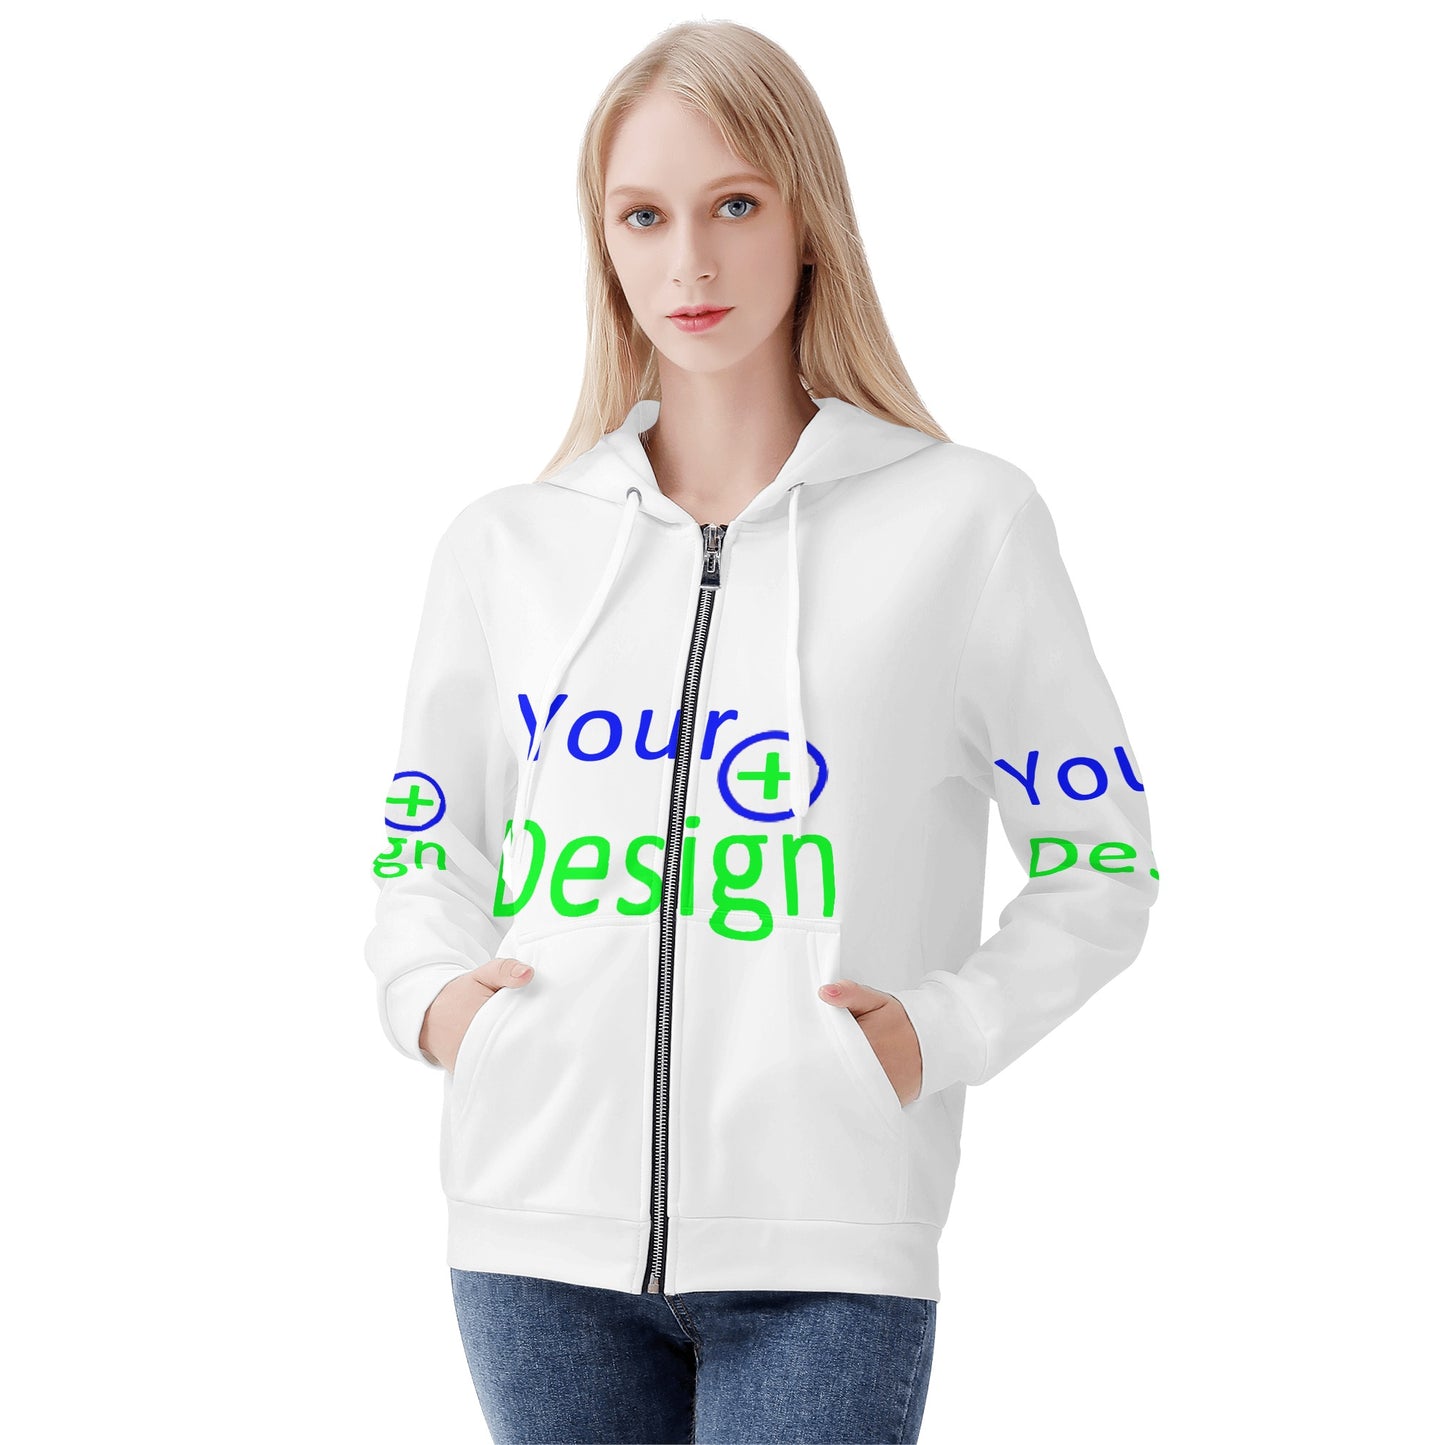 Womens All Over Print Zip Up Hoodie - Your design 